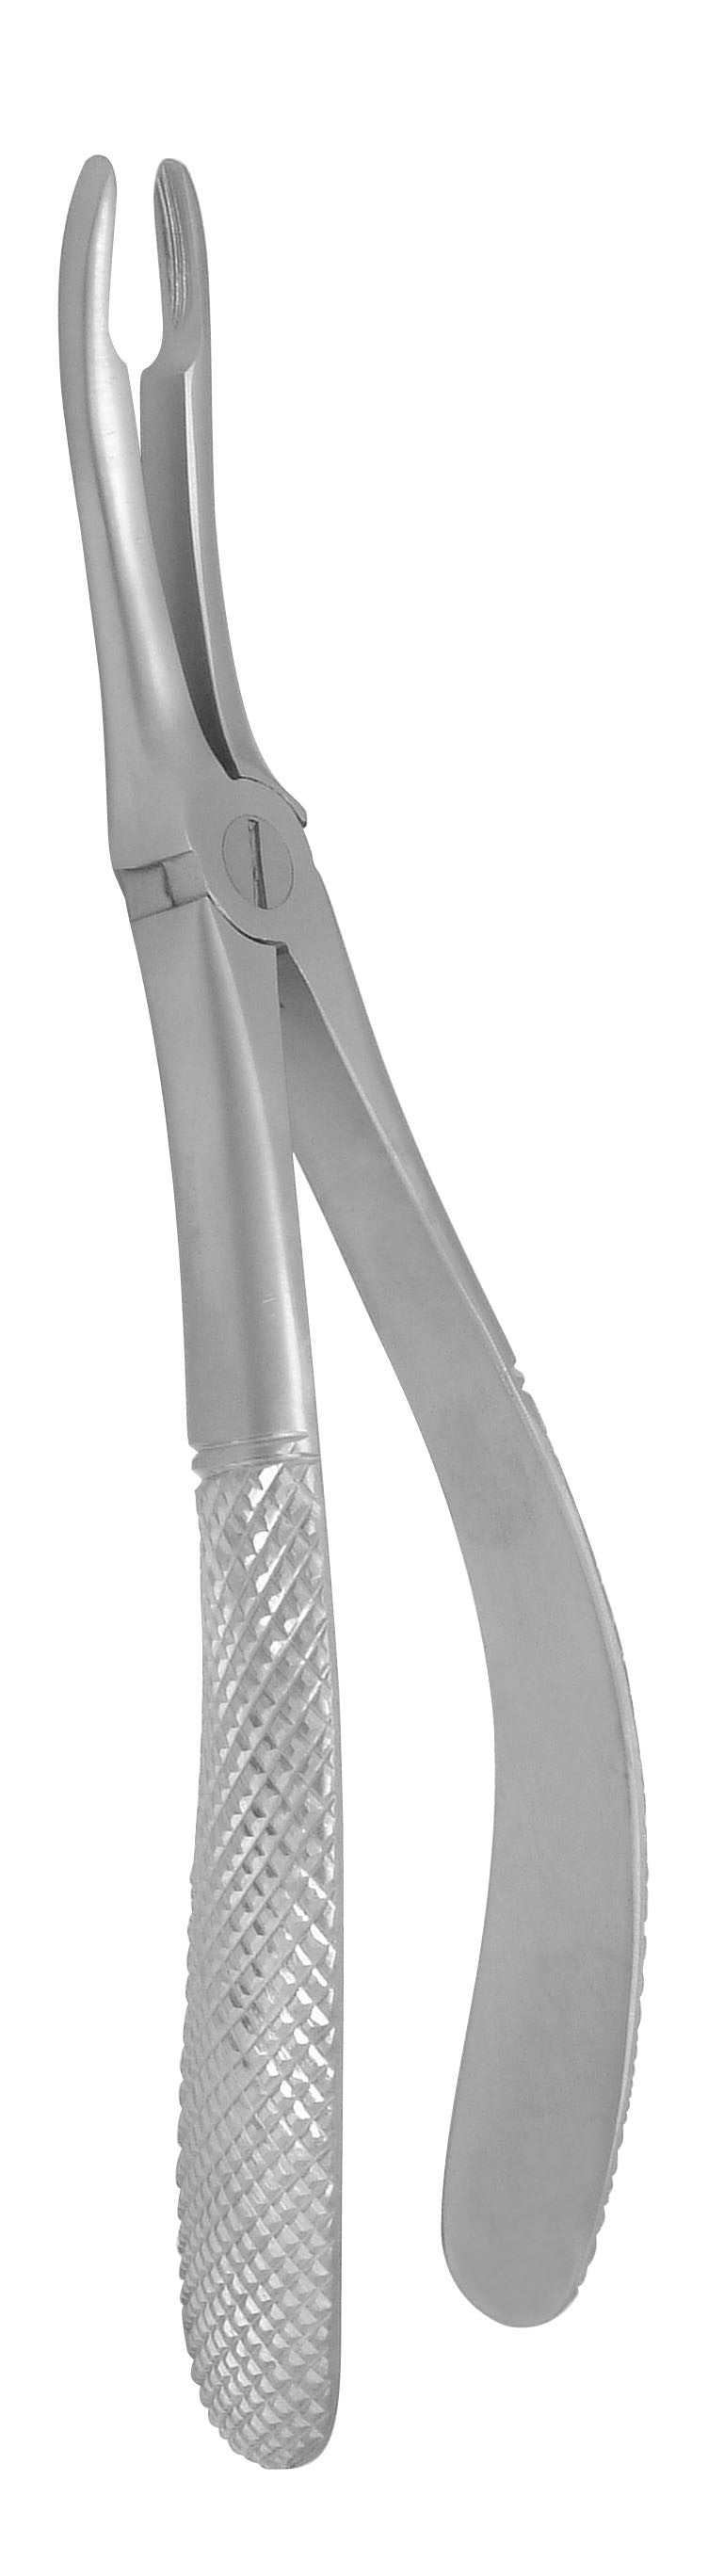 Extraction Forceps 044E